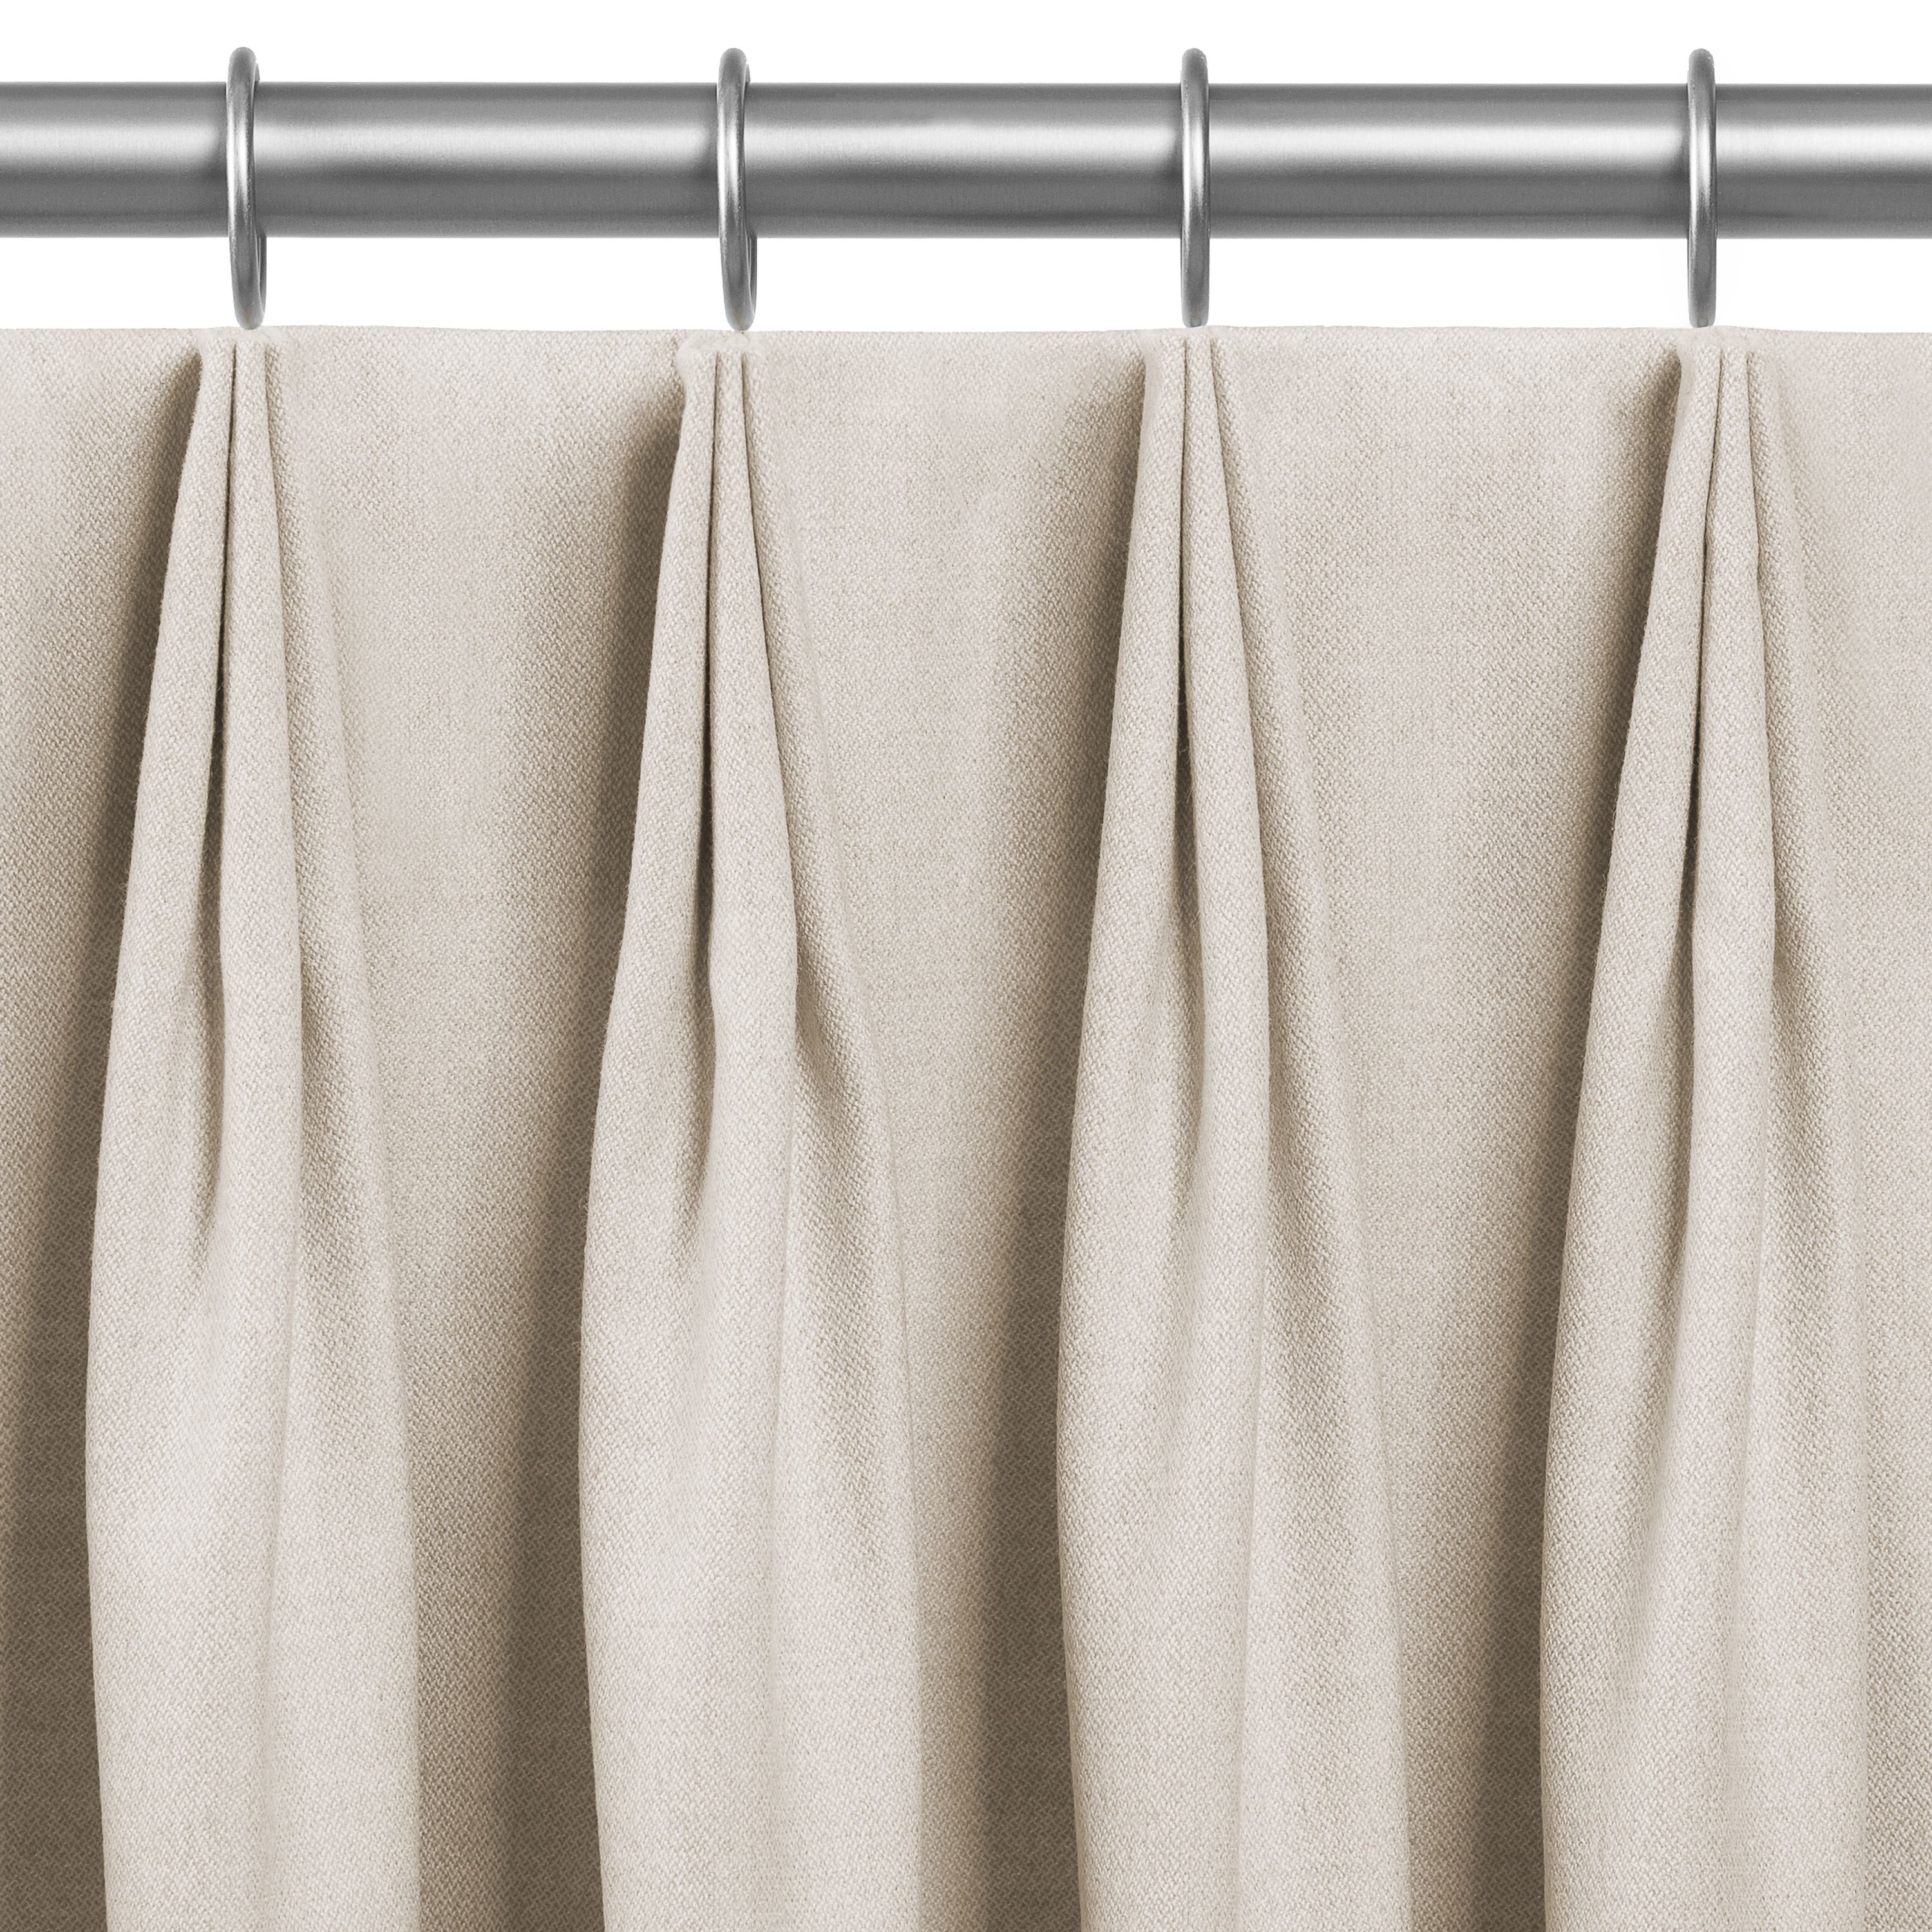 A Guide To Different Types Of Drapery Styles | The Shade Store Inside Linen Button Window Curtains Single Panel (View 14 of 20)